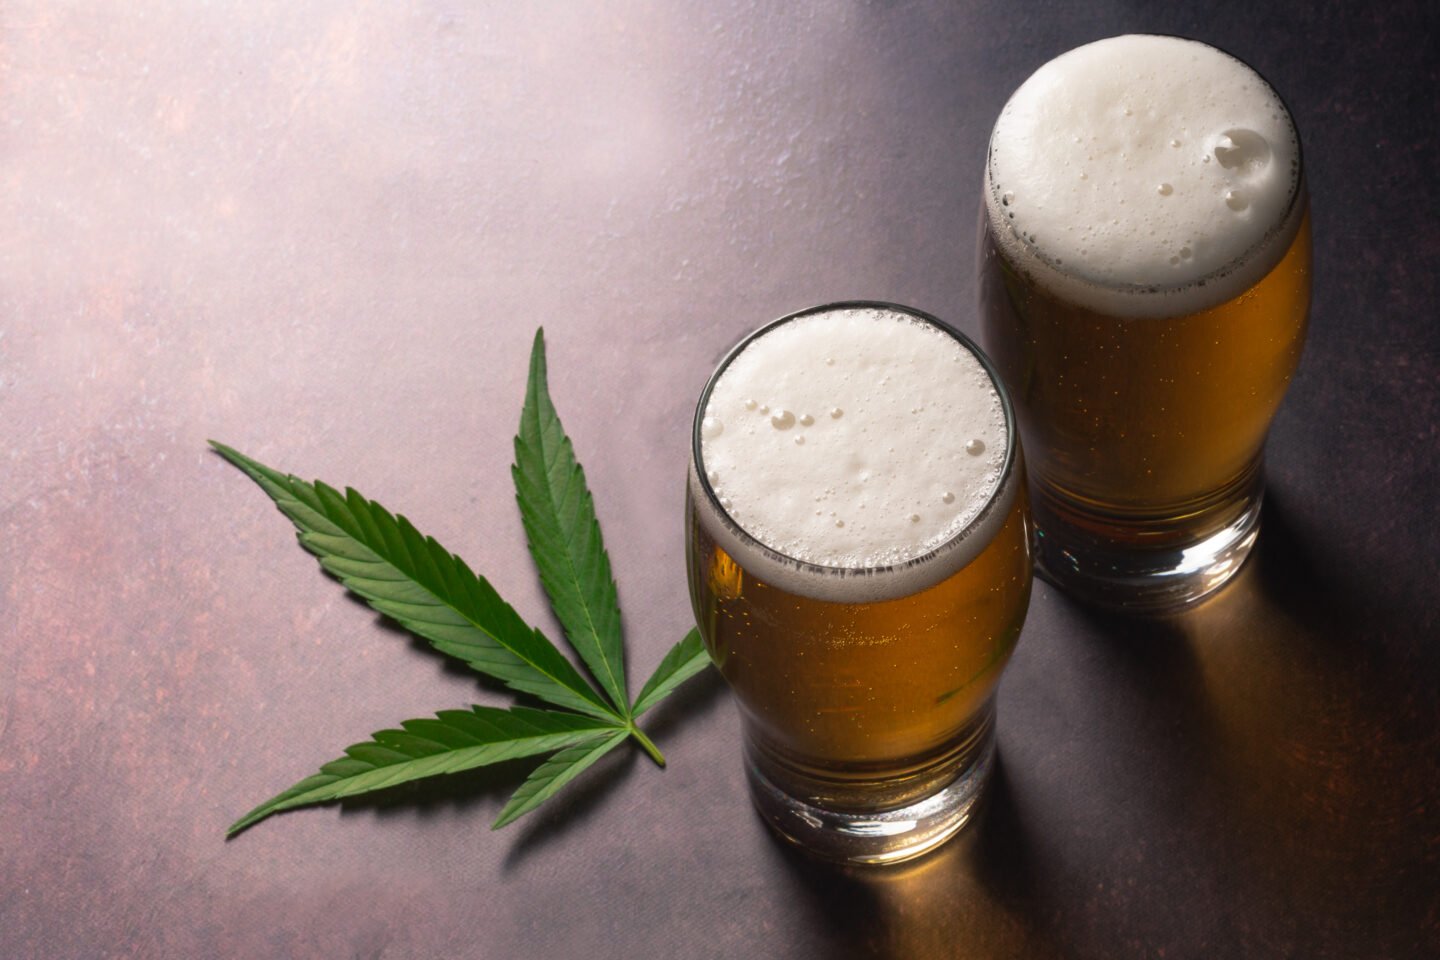 Minnesota Breweries See Benefits From State’s Cannabis Law